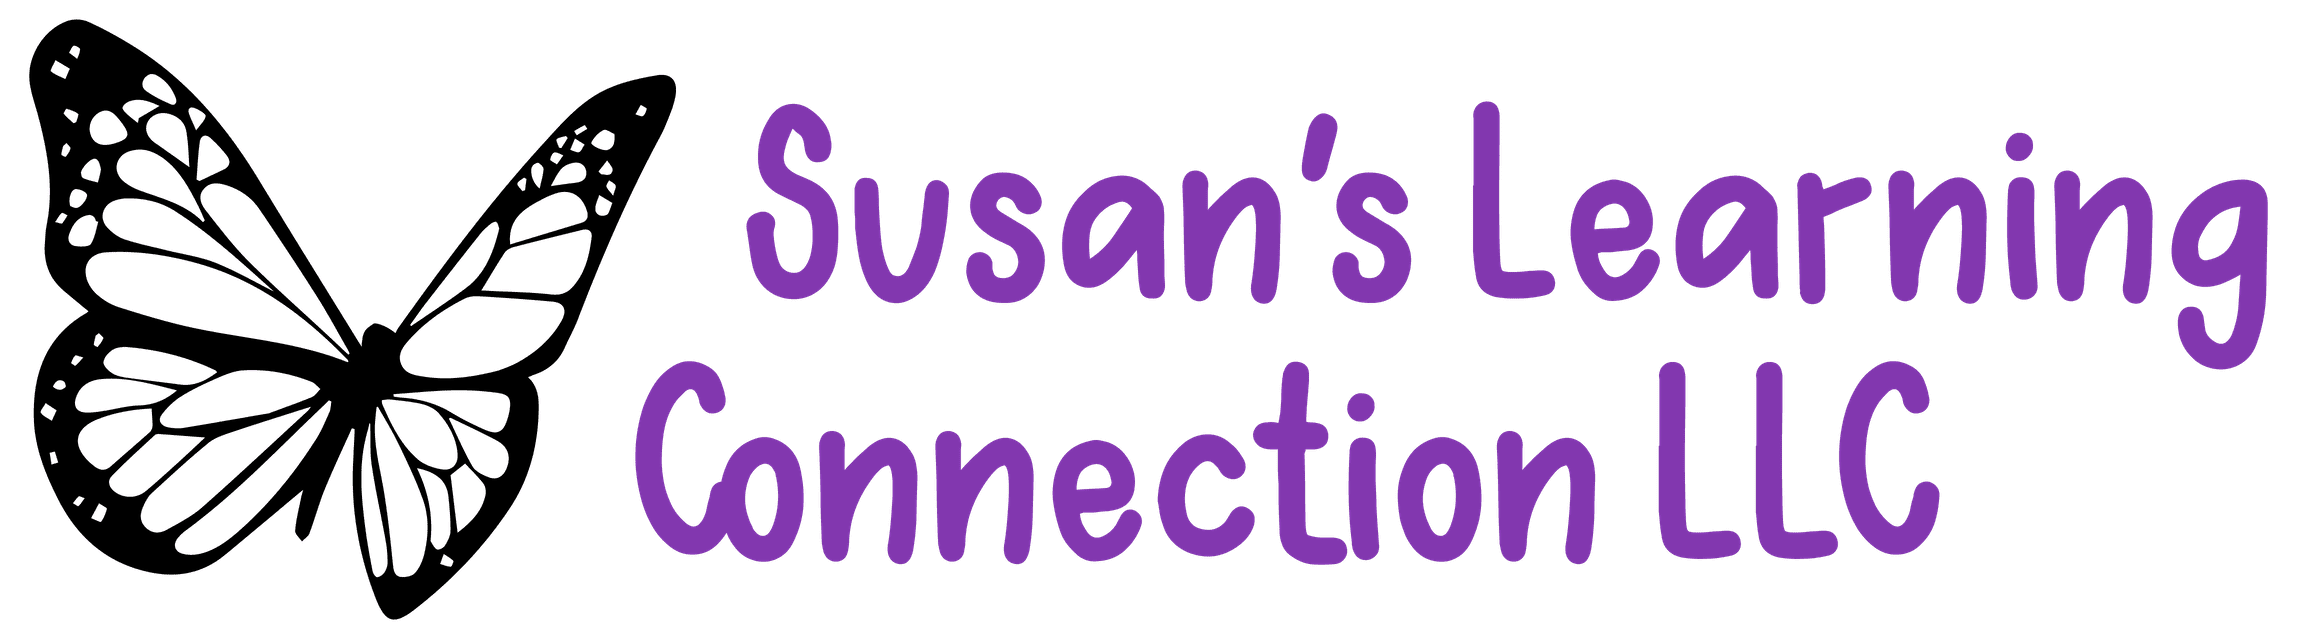 Susan's Learning Connection Logo